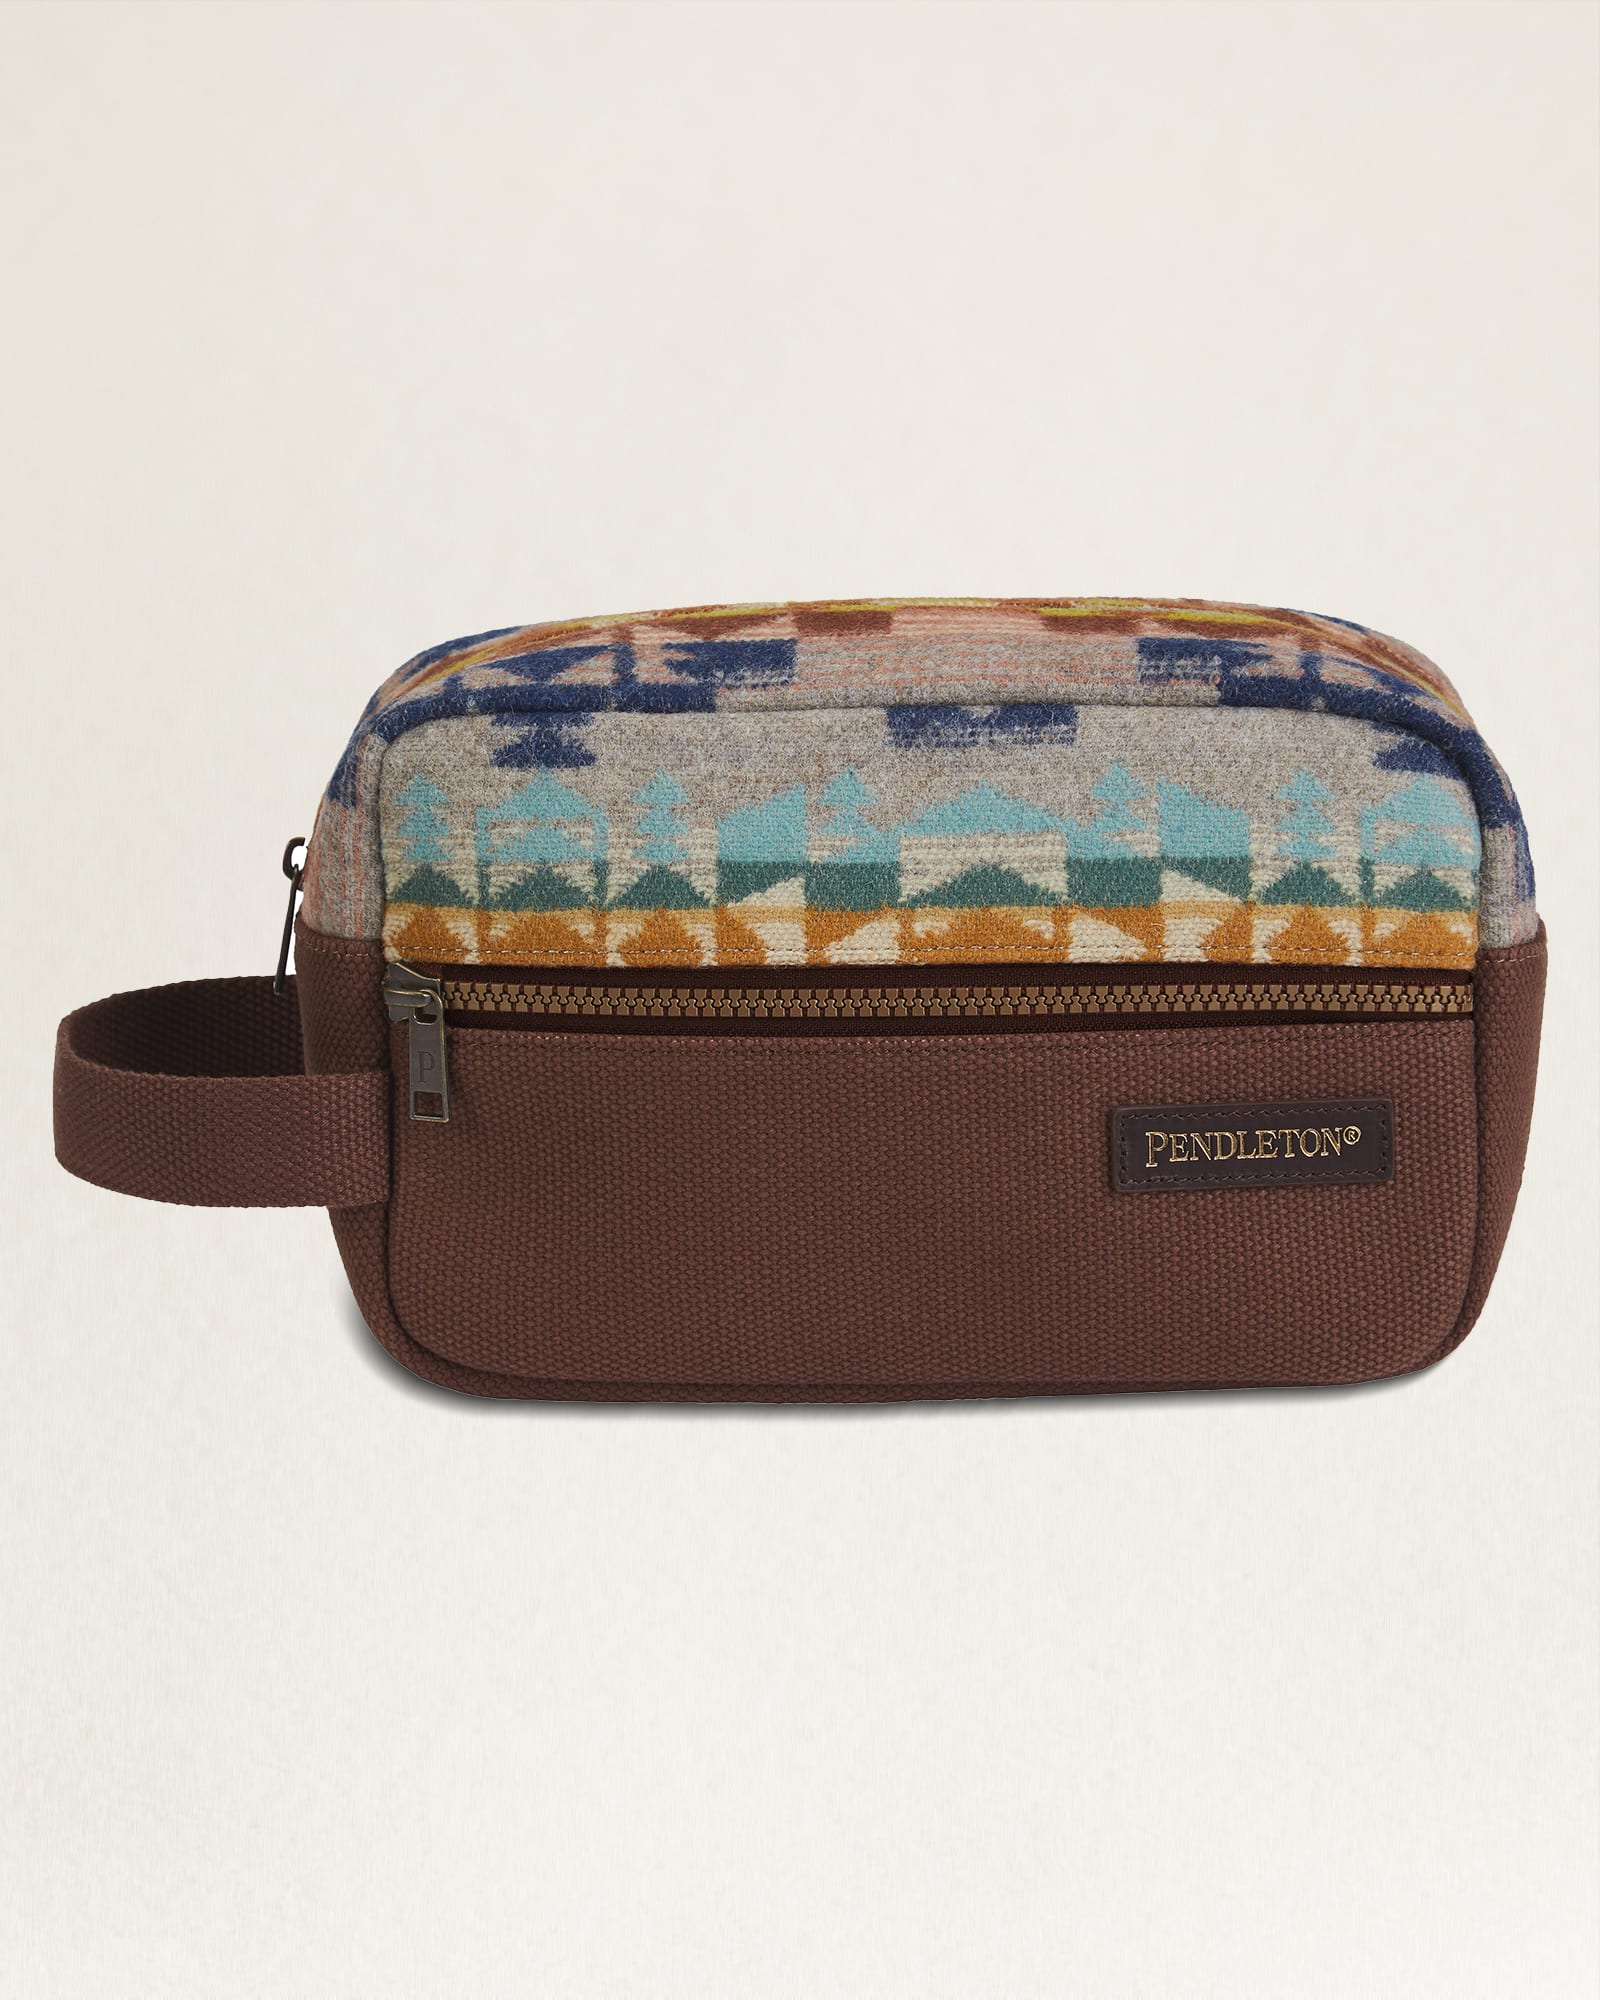 DESERT DAWN WOOL/LEATHER CARRYALL POUCH